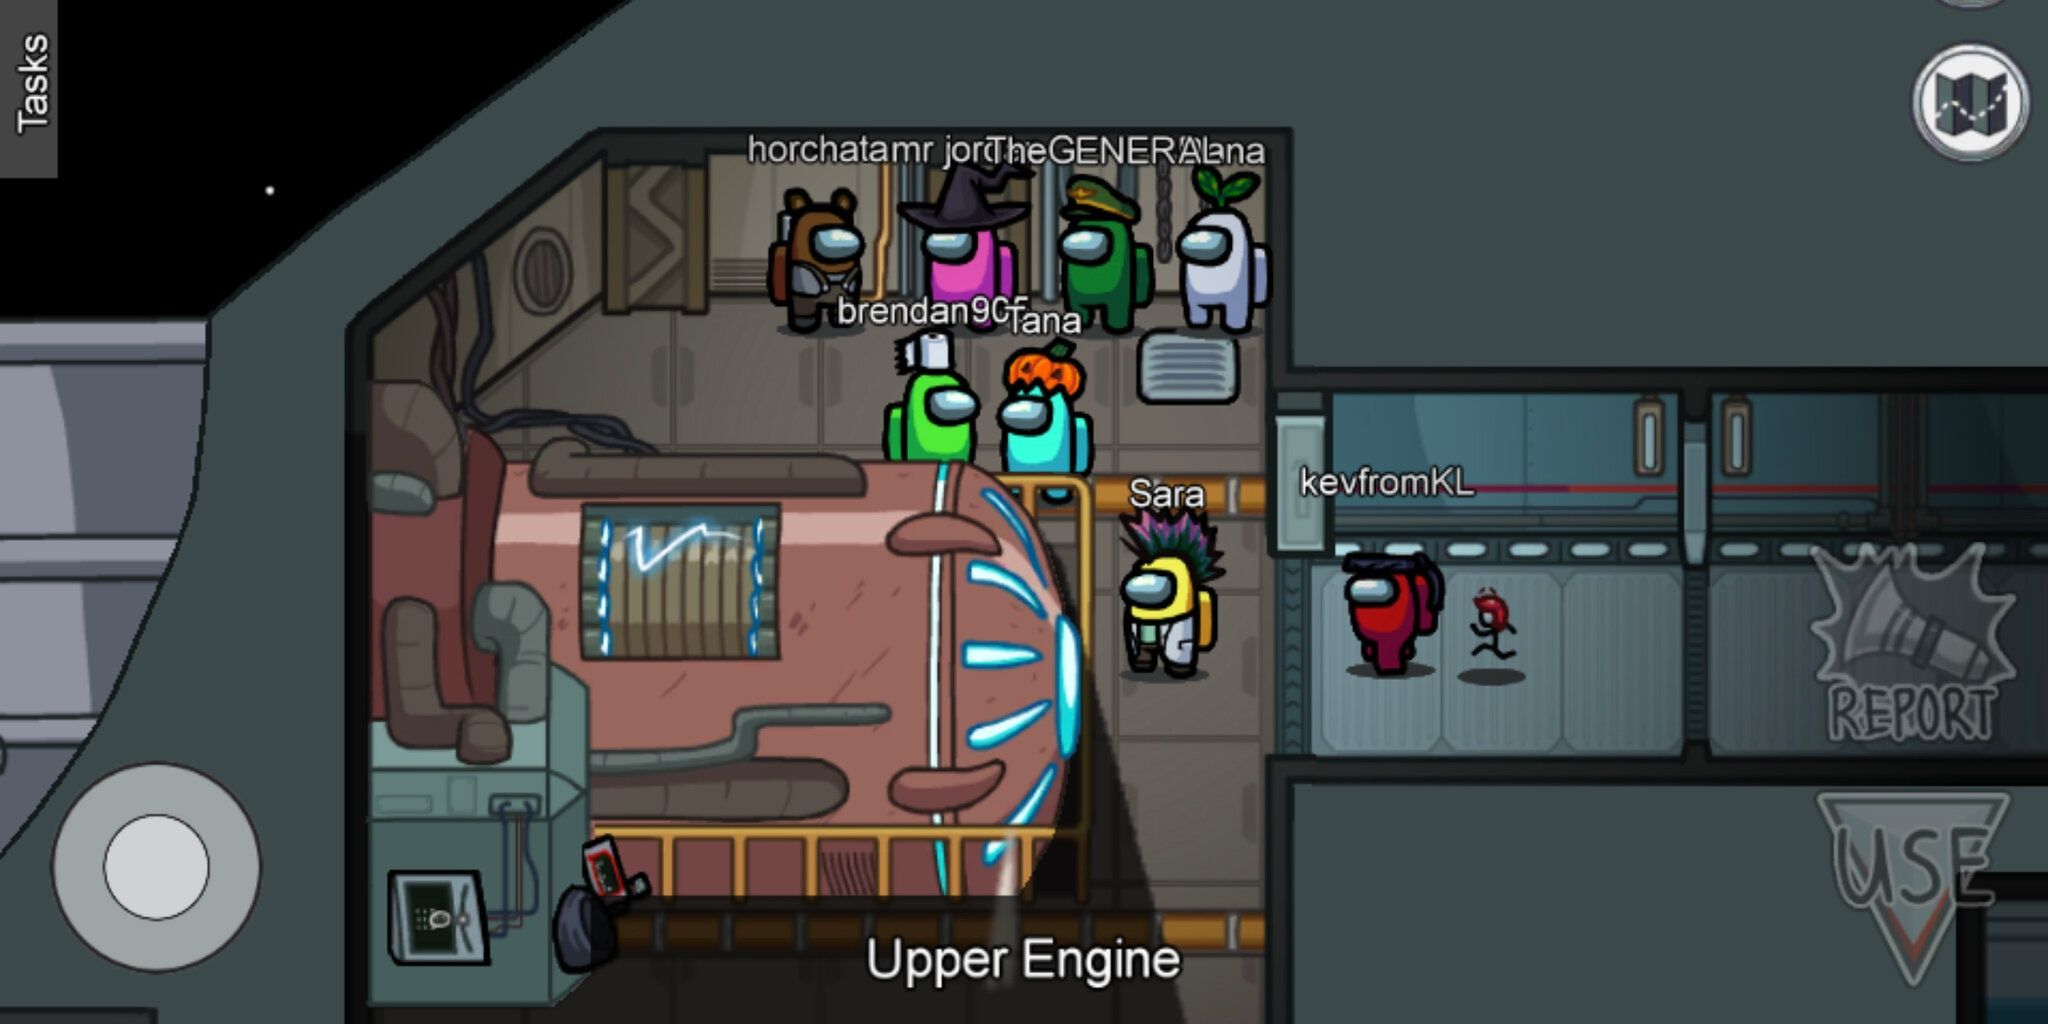 A screenshot showing gameplay in Among Us